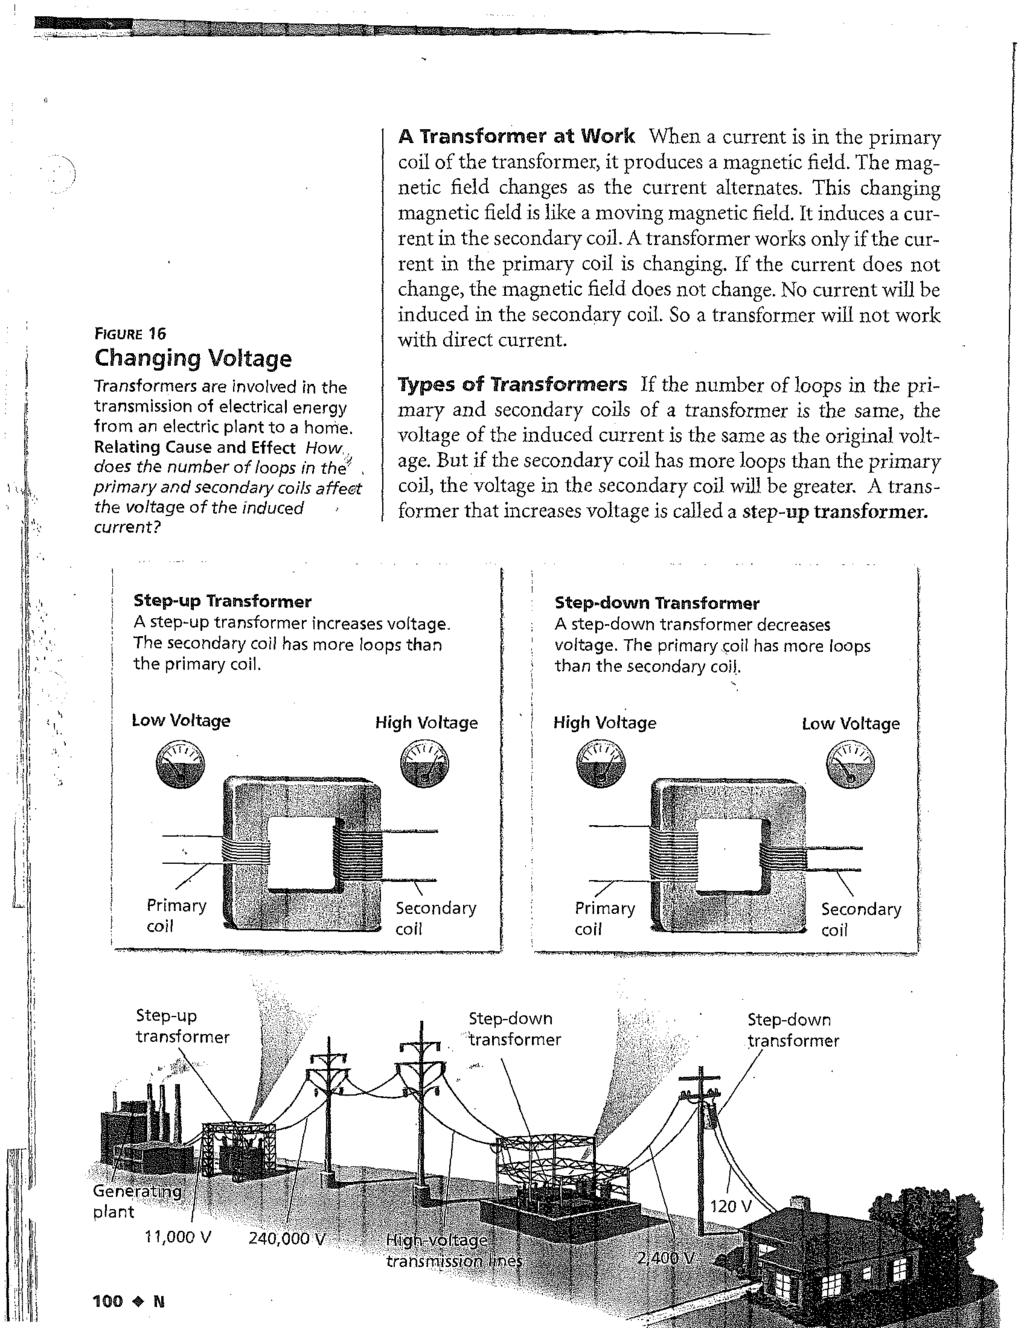 FIGURE 16 Changing Voltage Transformers are involved in the transmission of electrical energy from an electric plant to a home.